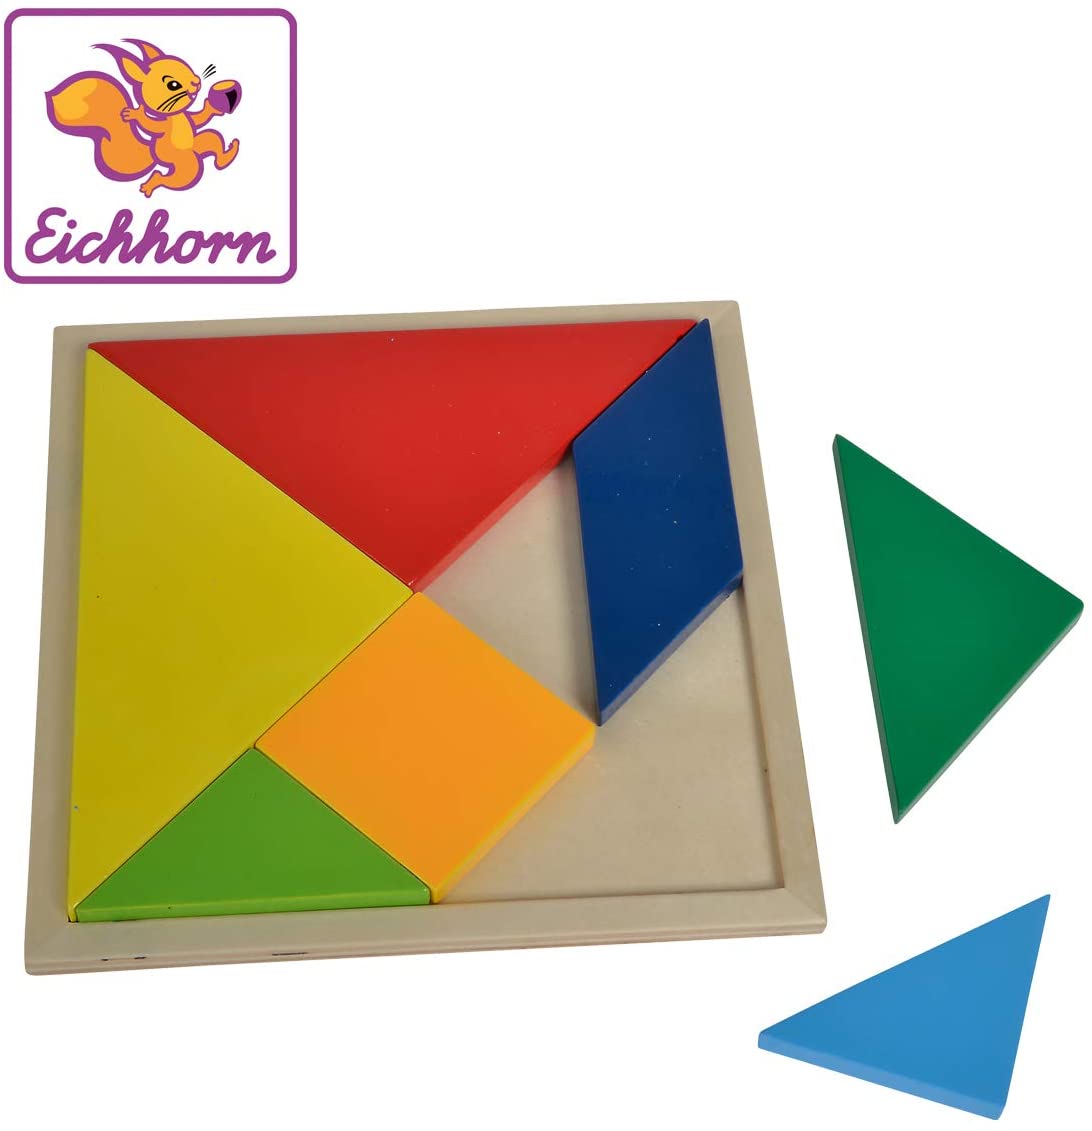 Eichhorn 100003451 Tangram Tiling Game with 7 Different Geometric and Colourful Wooden Shapes Includes Instructions (cannot guarantee instructions are in English) 8 Pieces